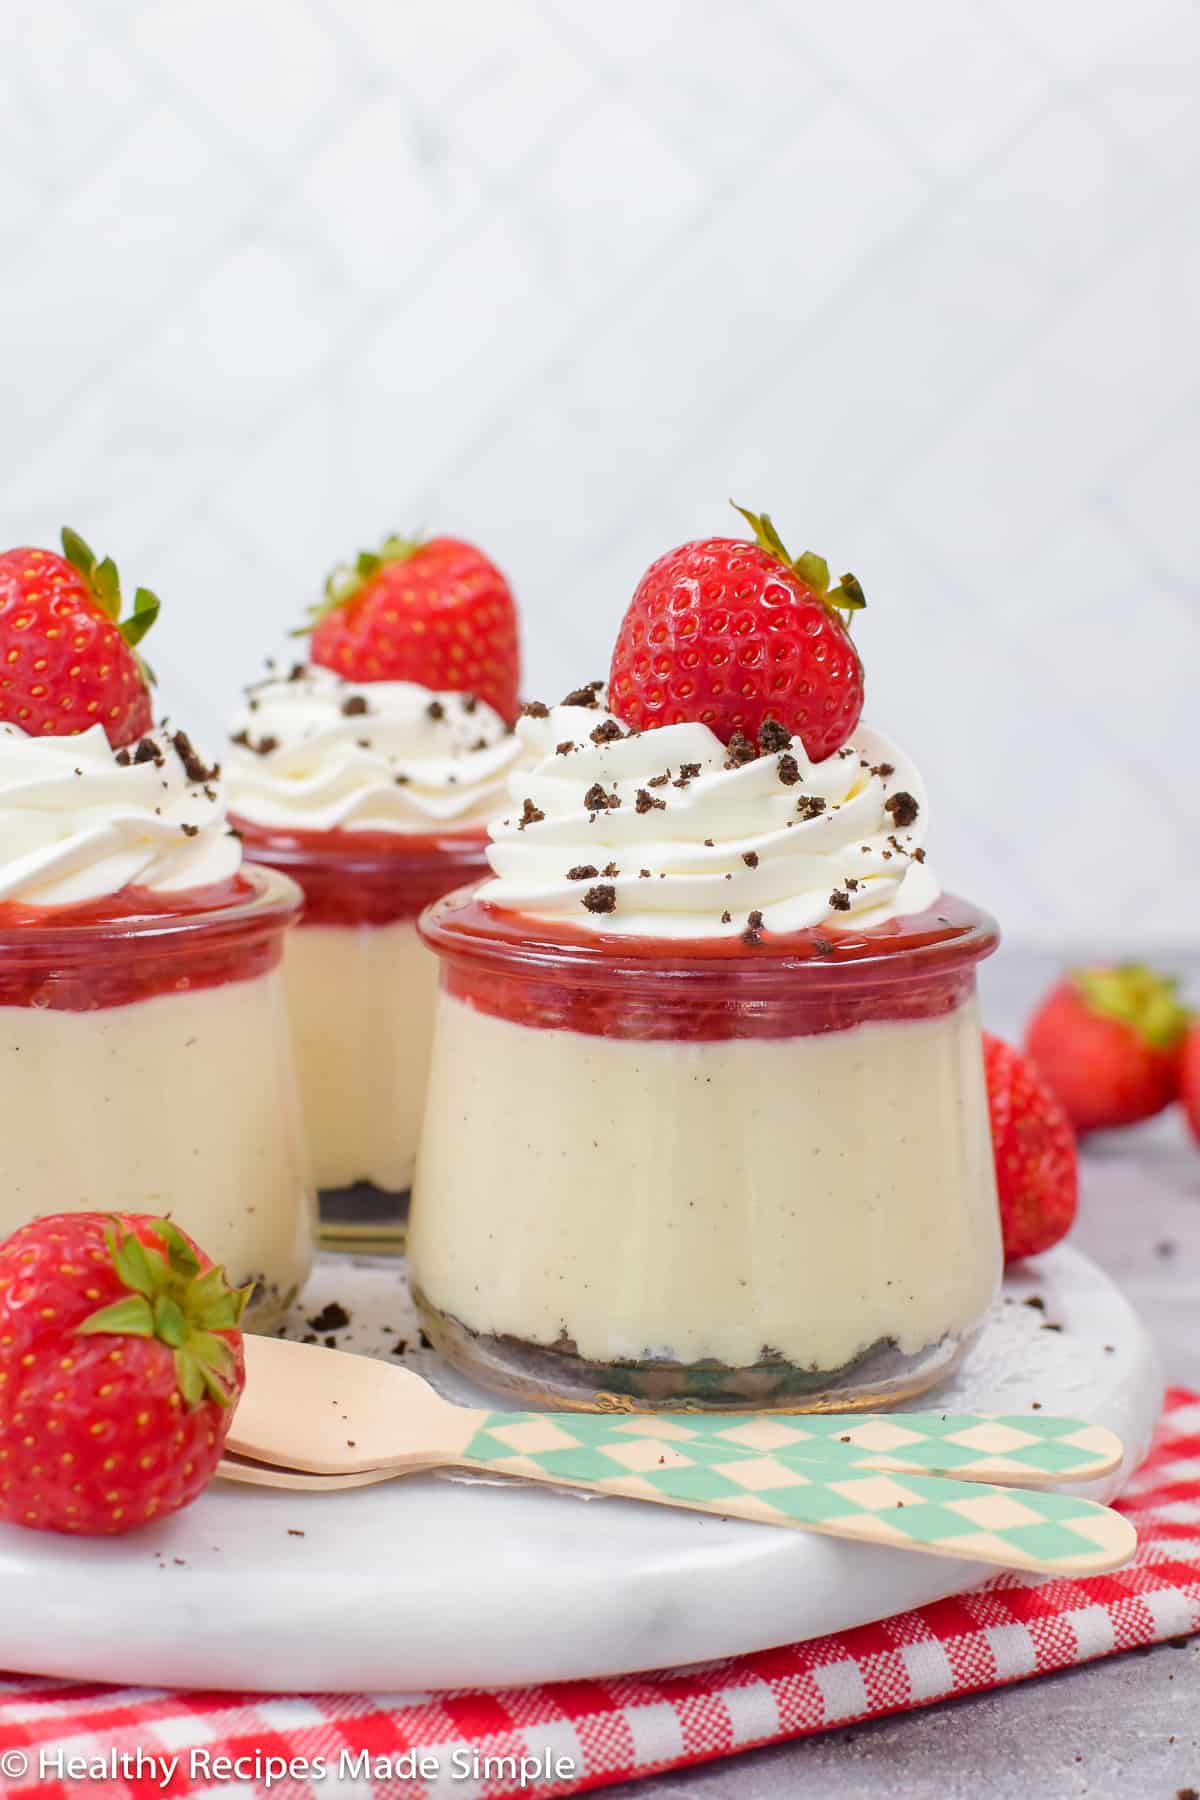 Pudding parfaits topped with whipped cream.